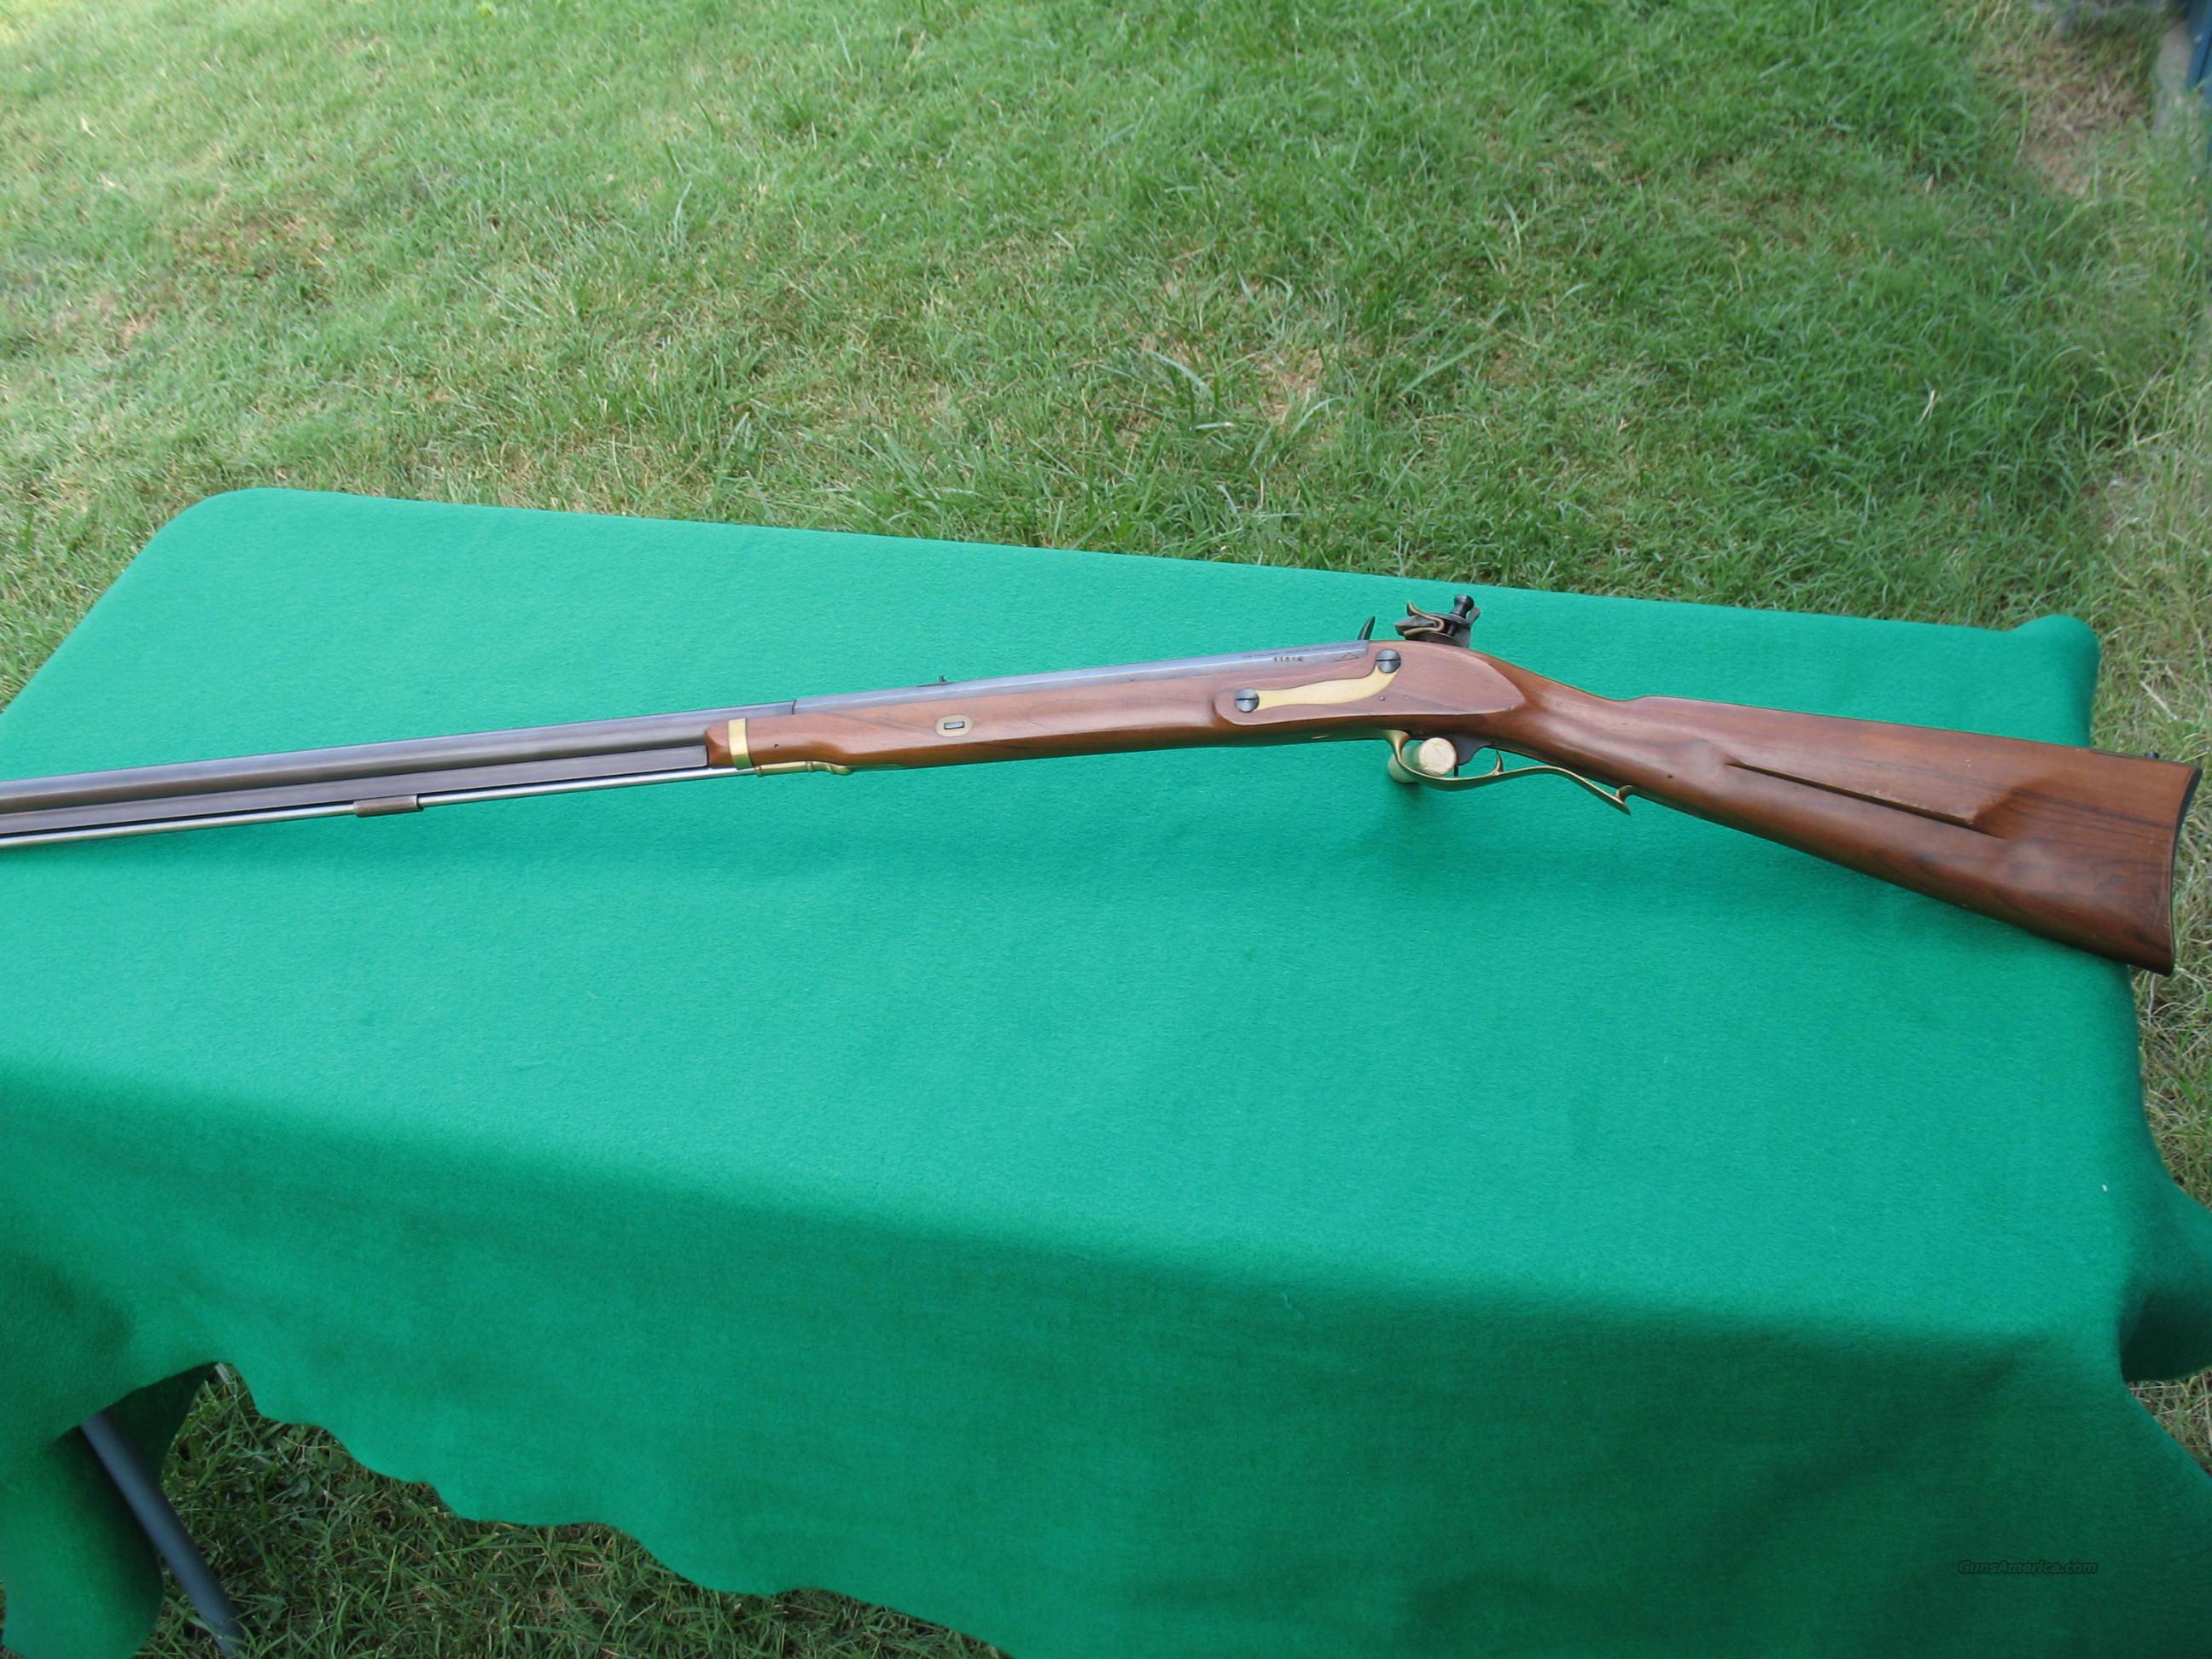 Amazing Harper's Ferry Model 1803 Rifle Pictures & Backgrounds